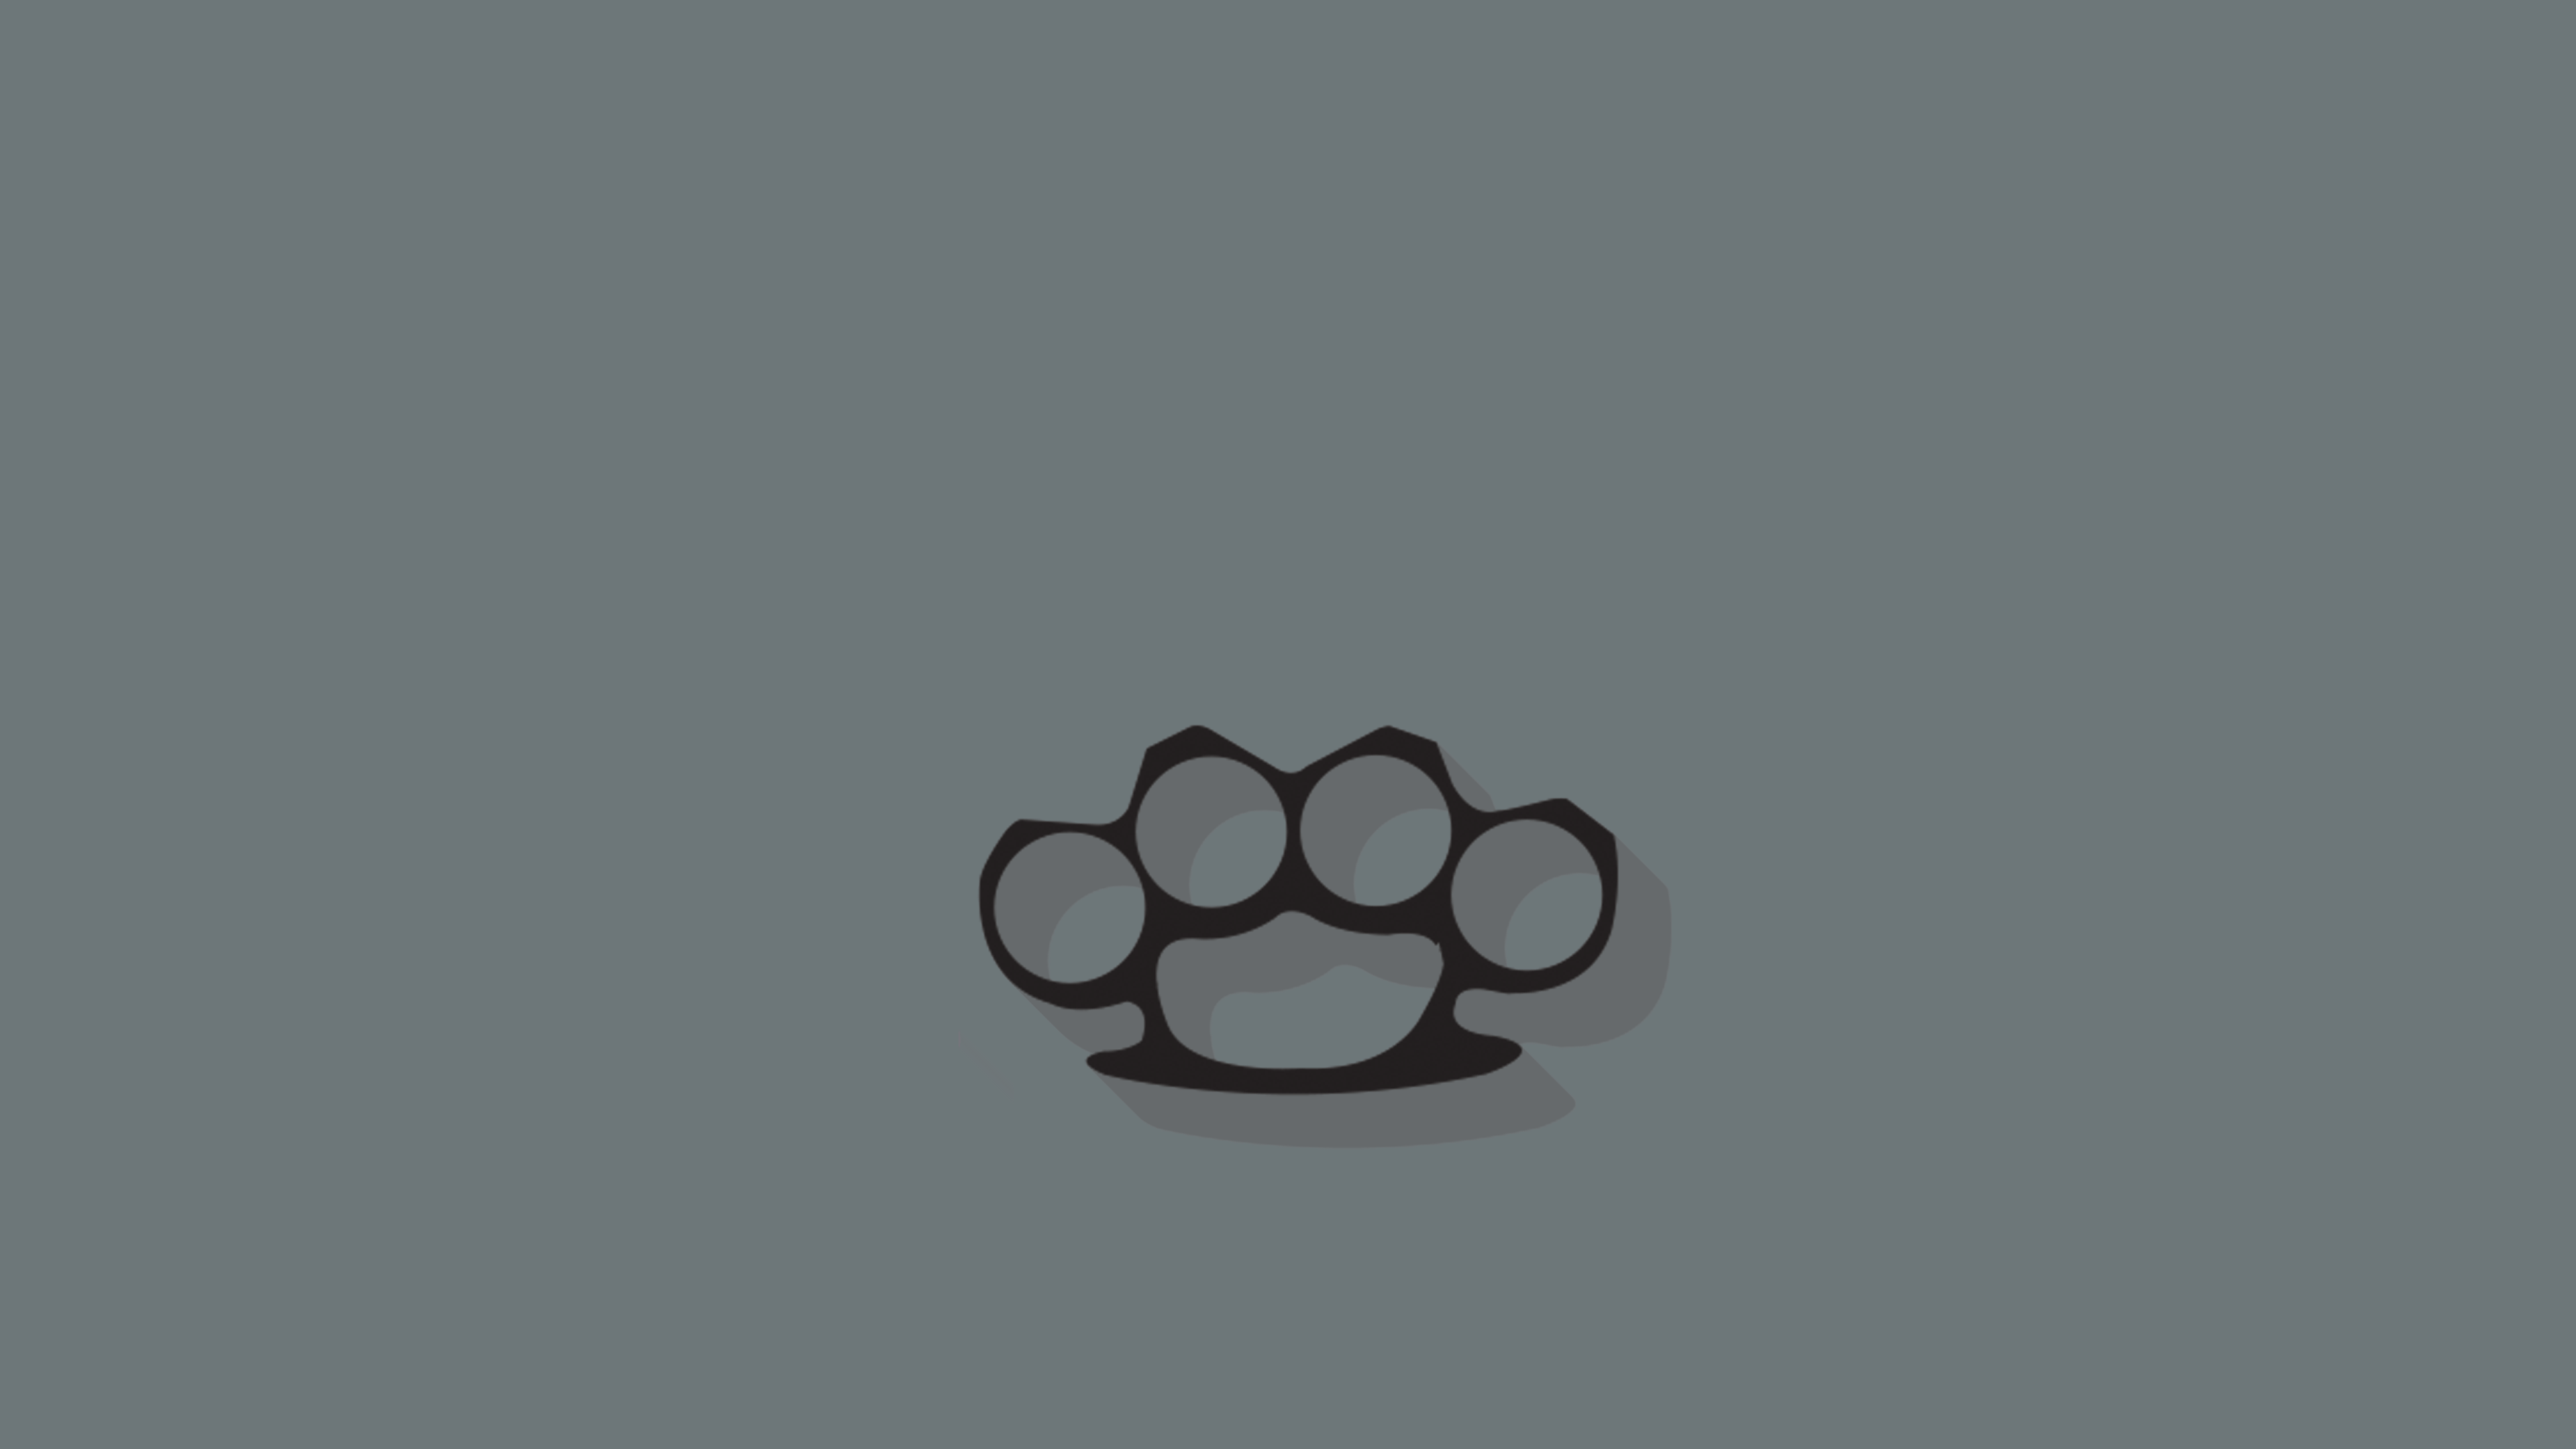 brass knuckles wallpaper Collection